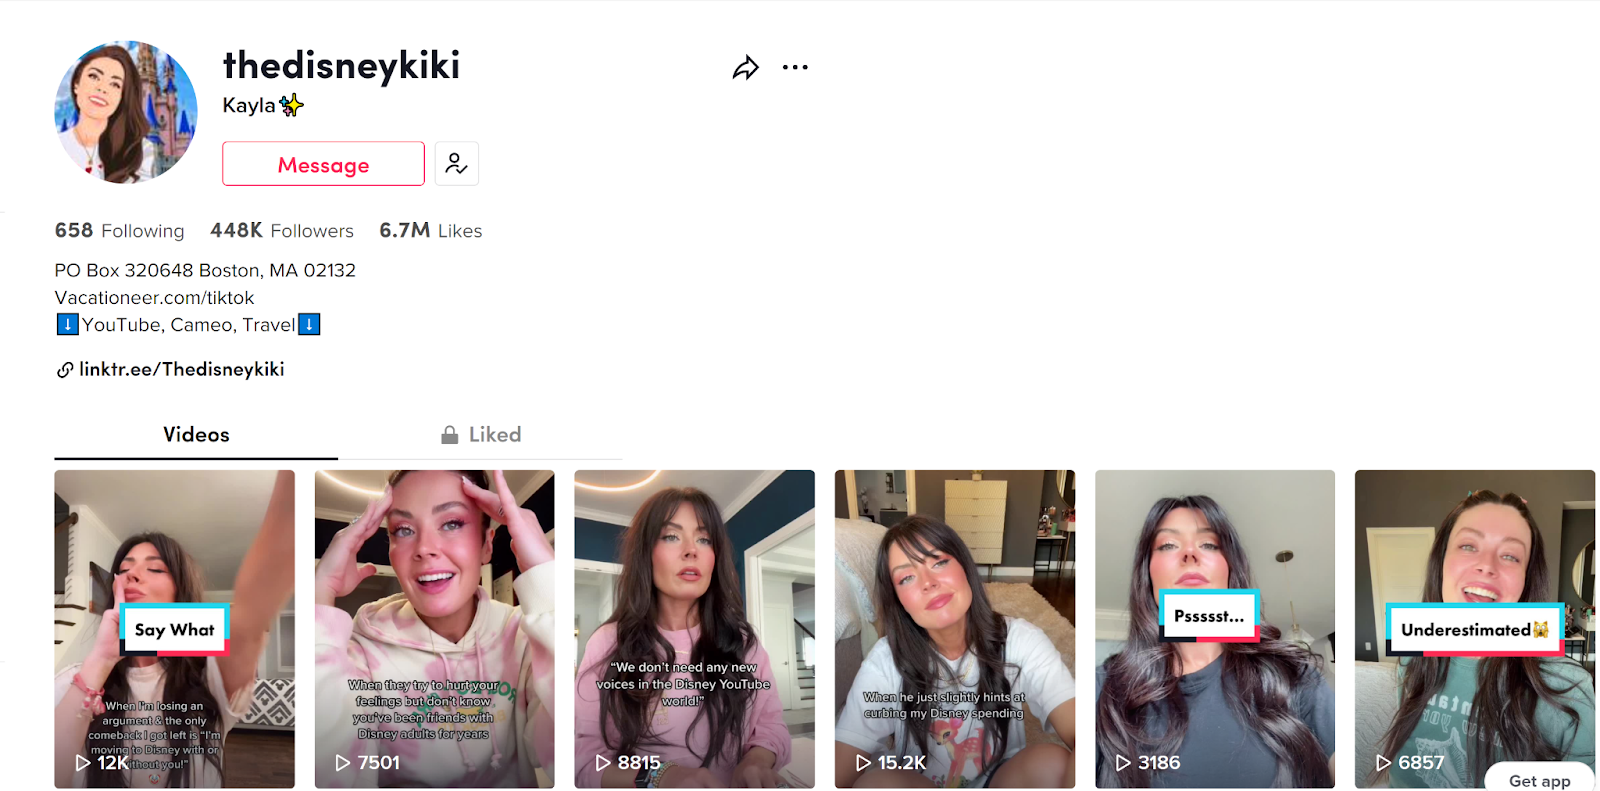 Kayla Cullity: Growing TheDisneyKiki, Becoming an Influencer and Social Media Manager, and Tiktok vs. YouTube